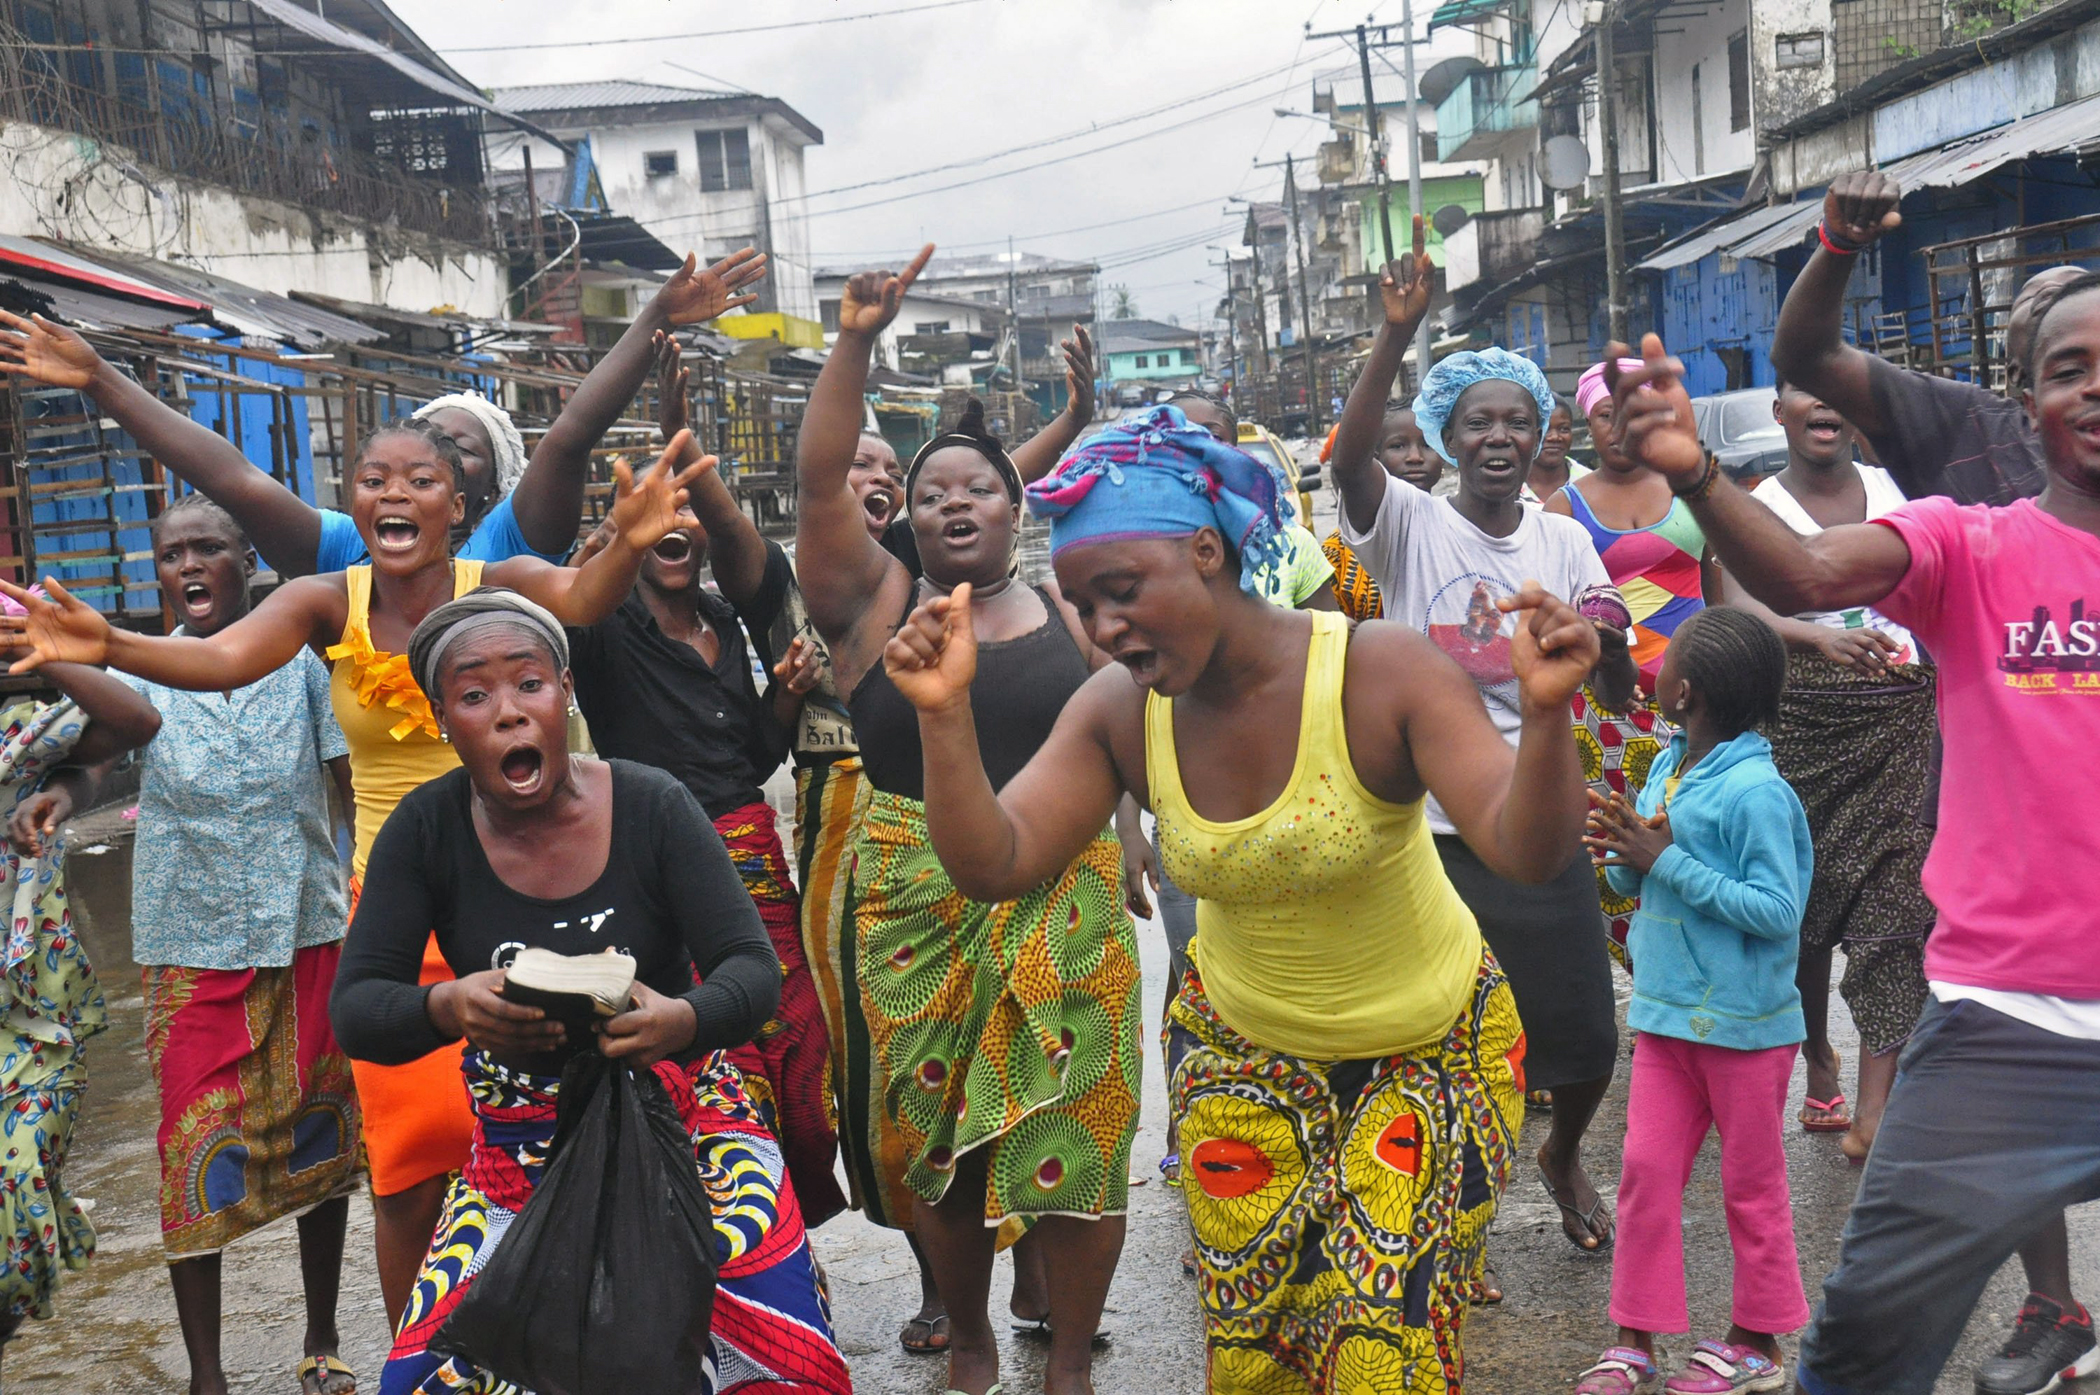 People celebrate in a street outside of West Point slum in Monrovia, Liberia, Aug. 30, 2014. Crowds cheer and celebrate in the streets after Liberian authorities reopened a slum where tens of thousands of people were barricaded amid the countryís Ebola outbreak.